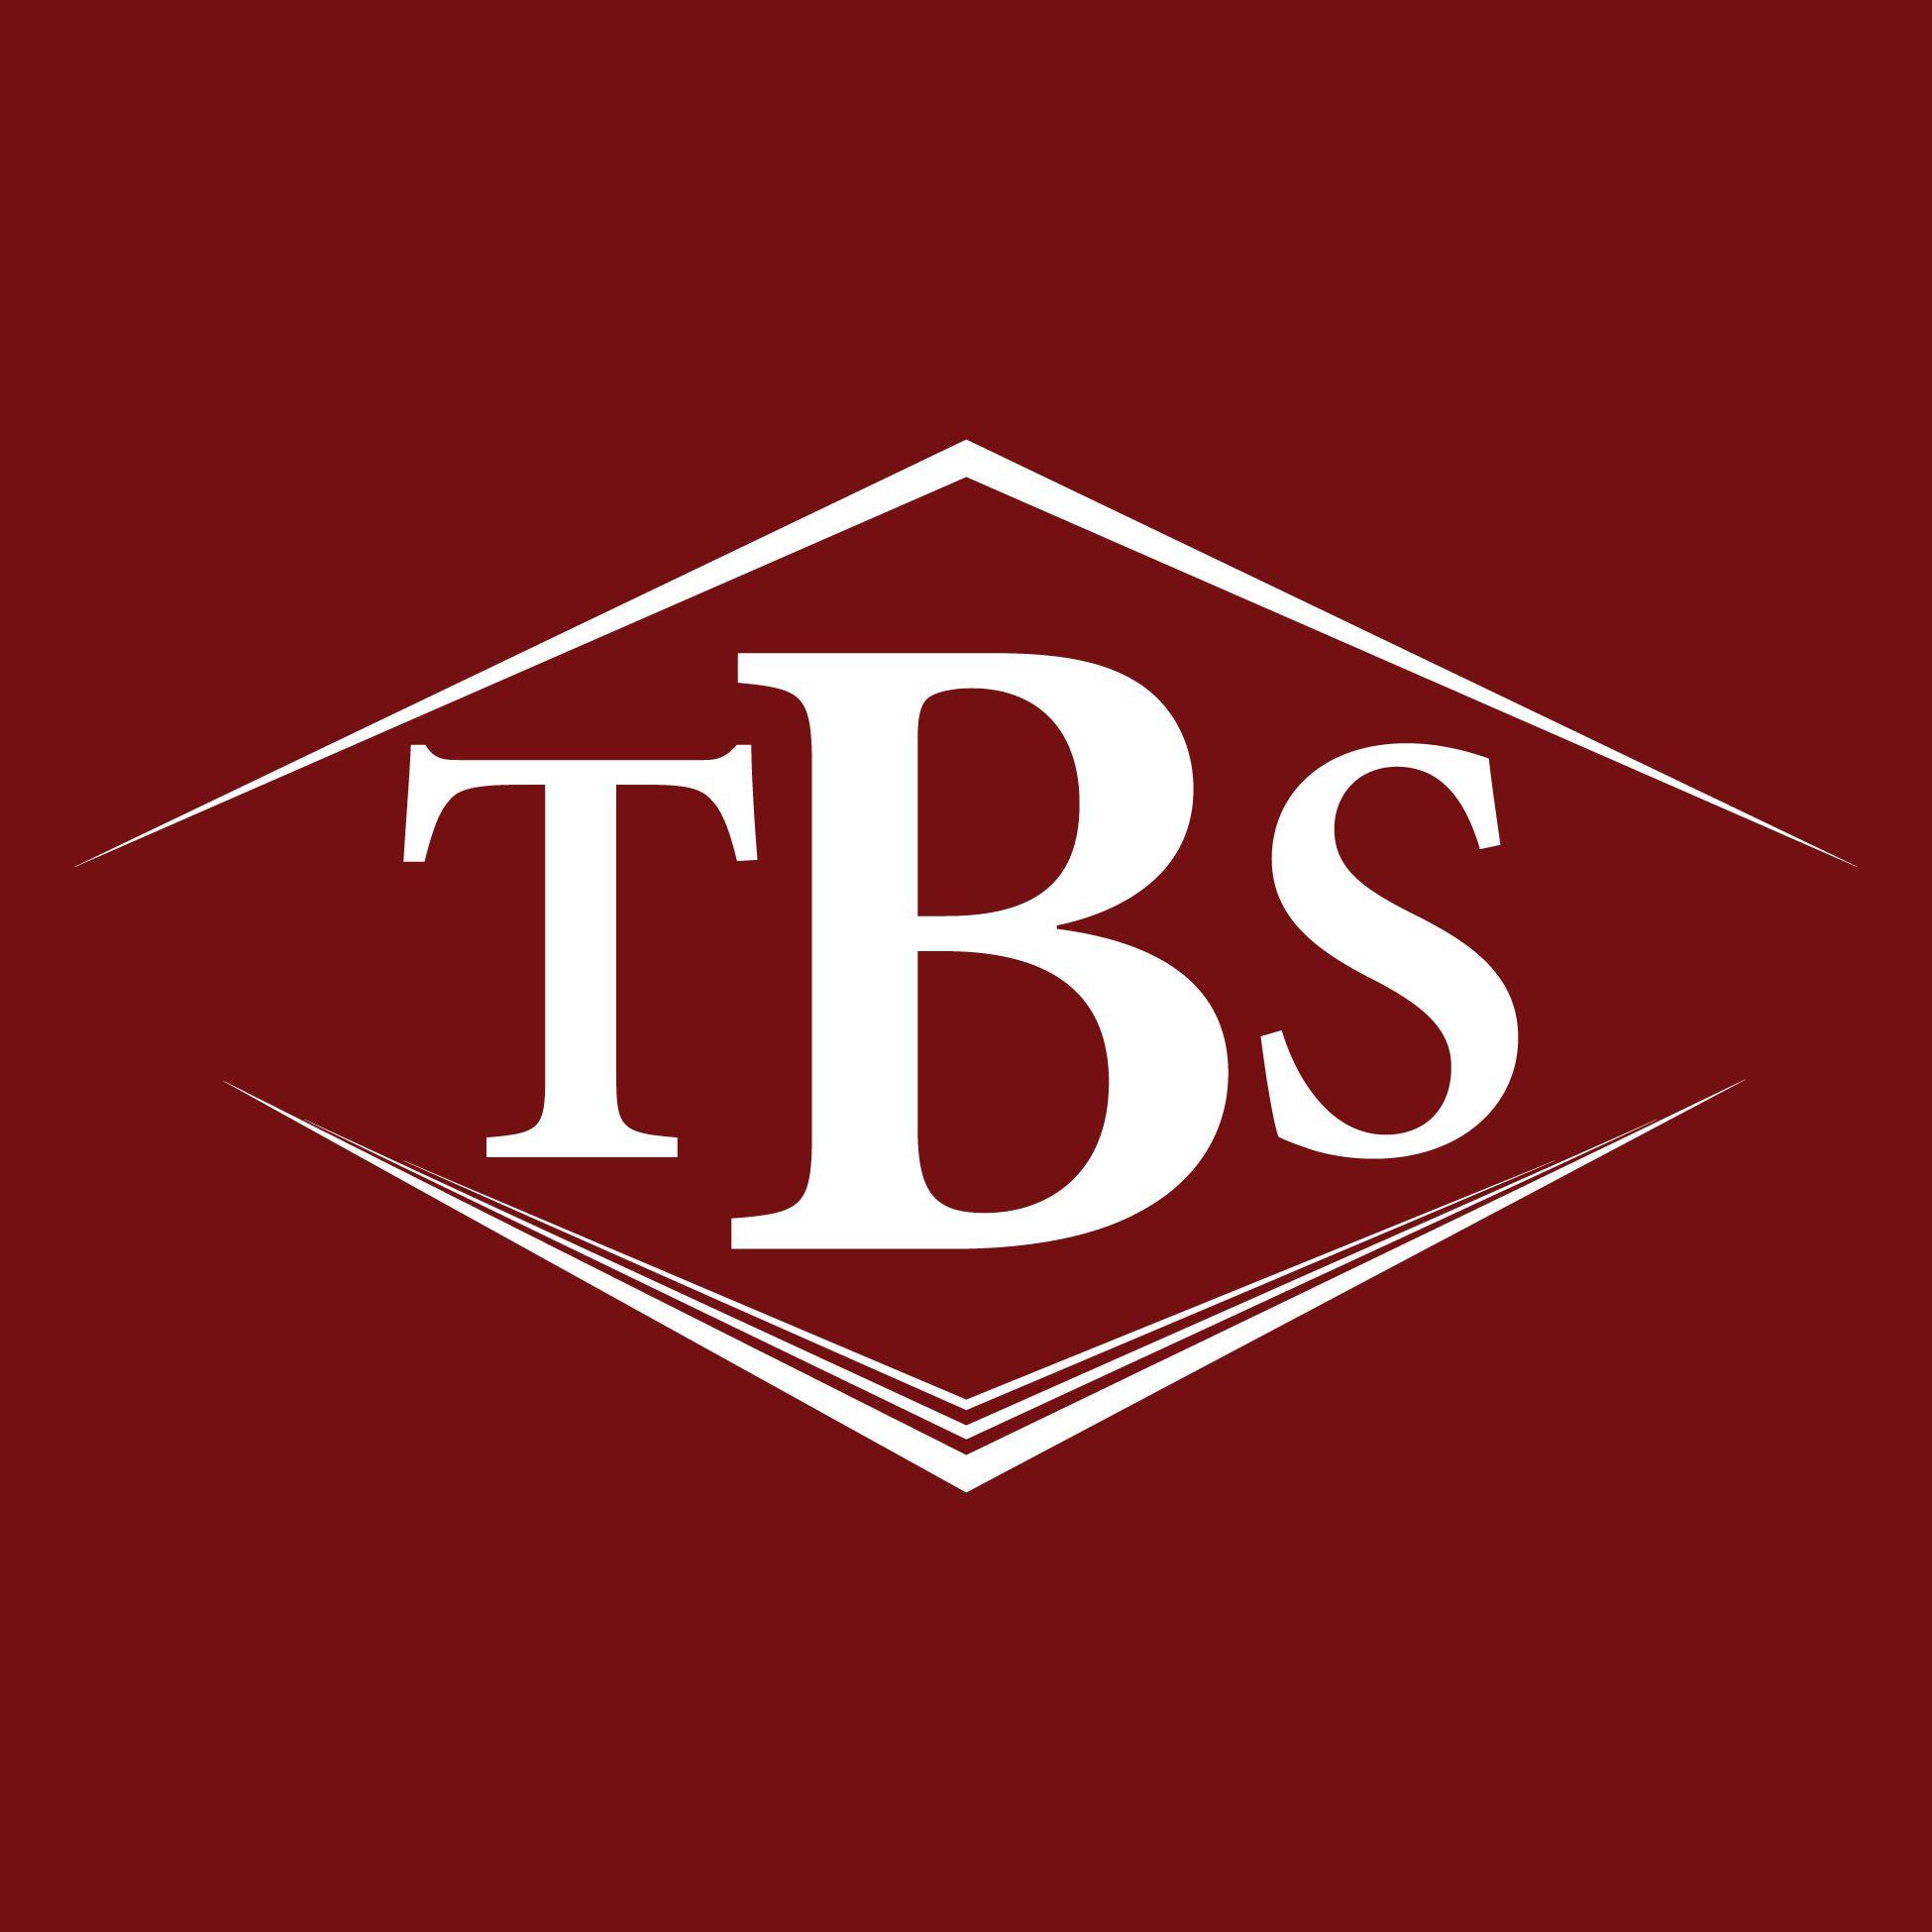 TBS Logo - Documents and Files - The Bible Seminary